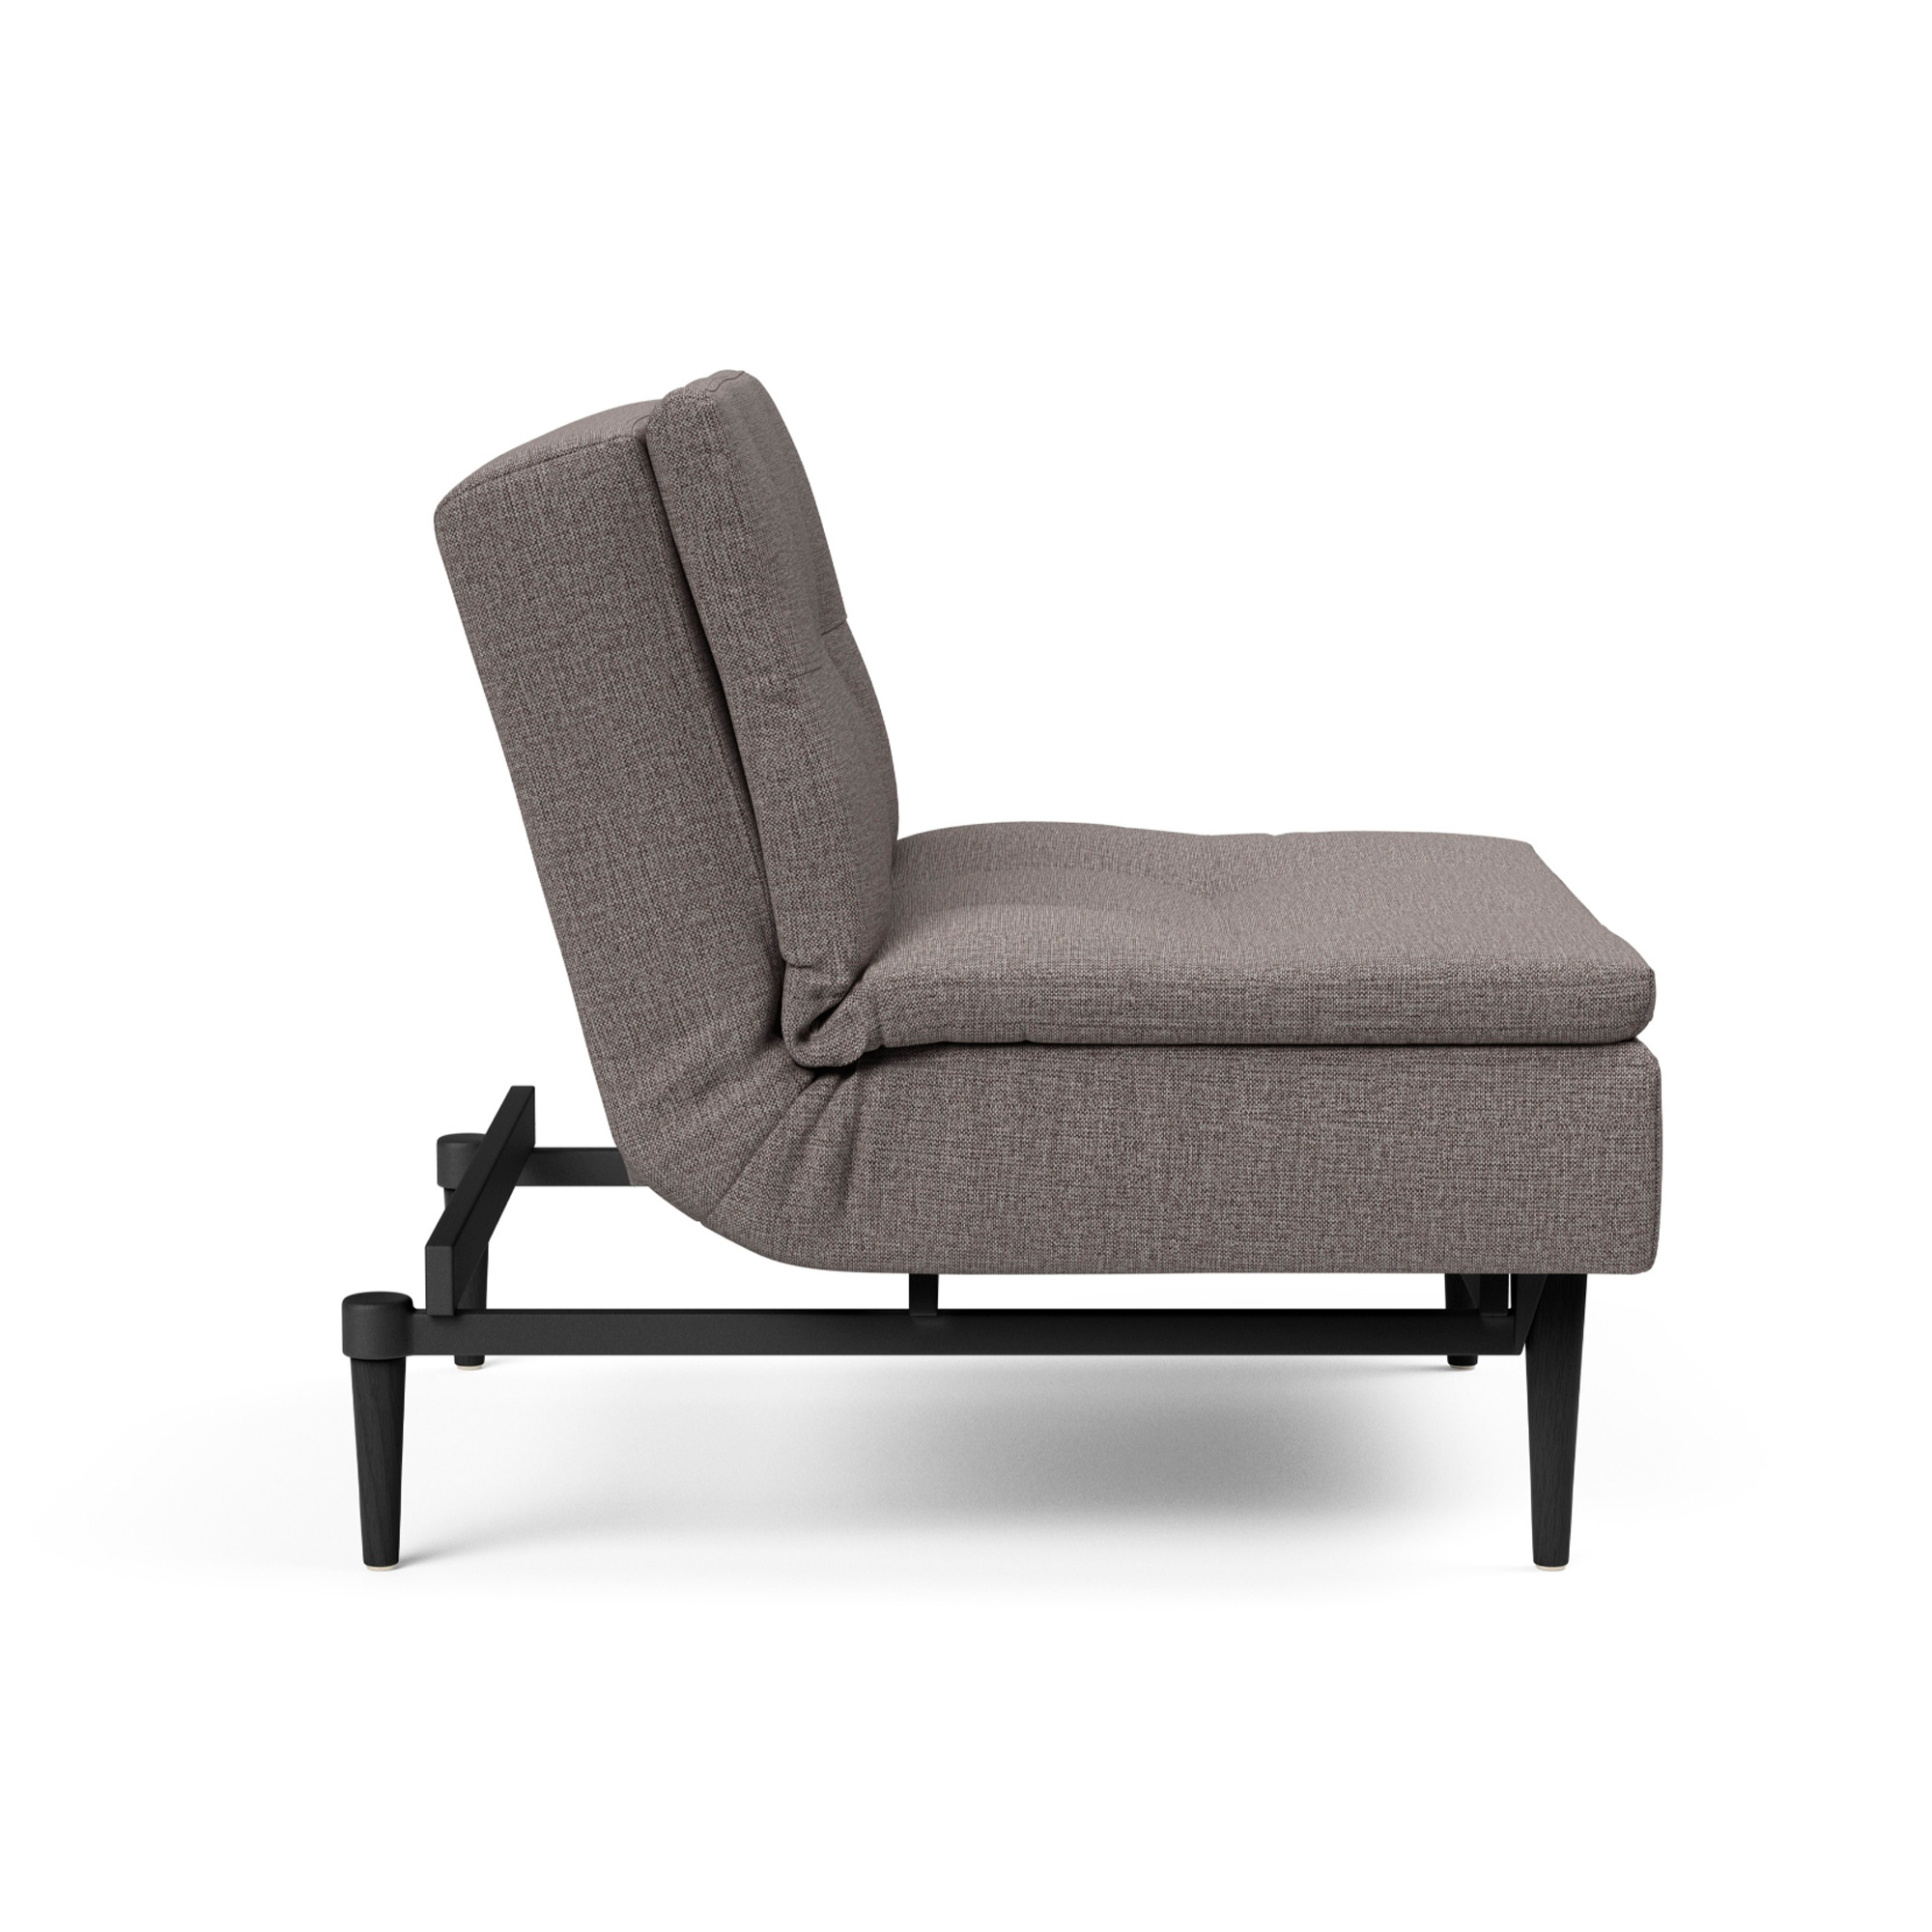 Dublexo Reclining Chair with Dark Wood Legs in Mixed Dance Grey by ...